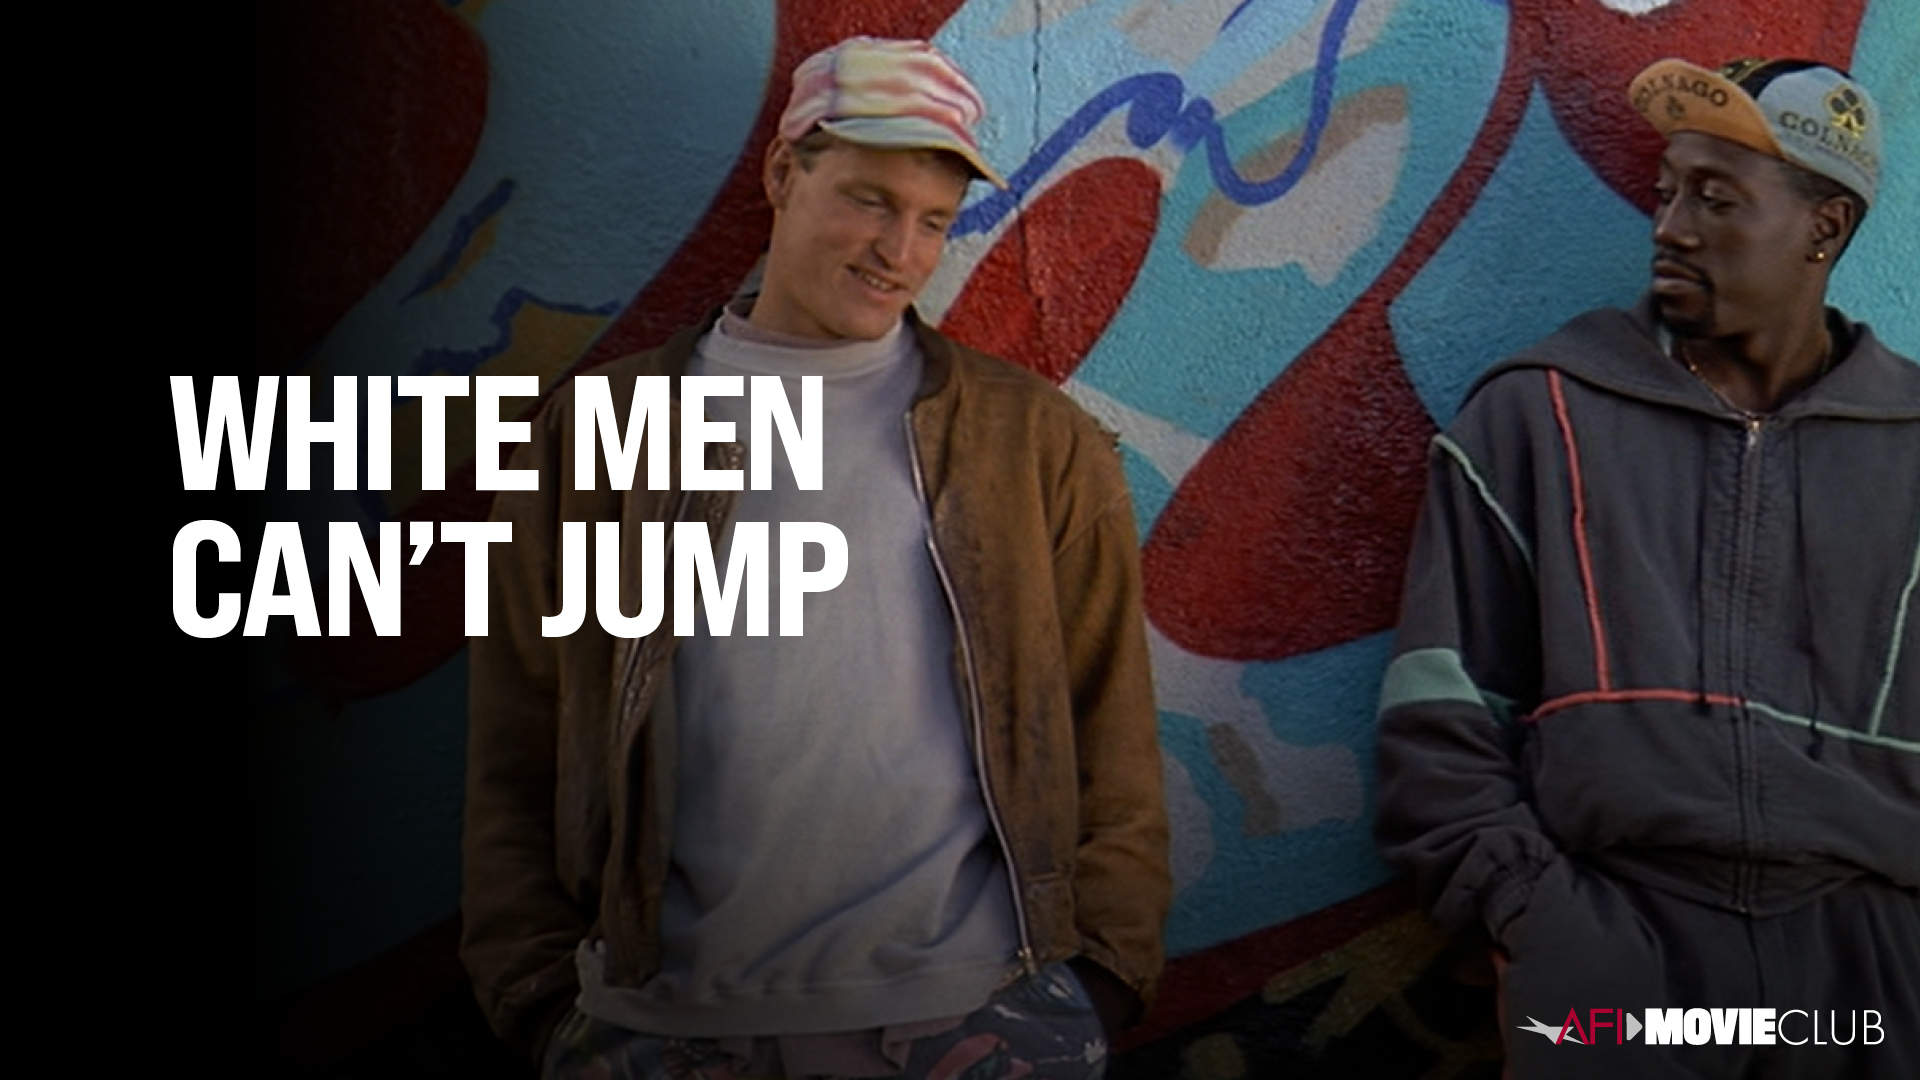 White Men Can't Jump Film Still - Woody Harrelson and Wesley Snipes